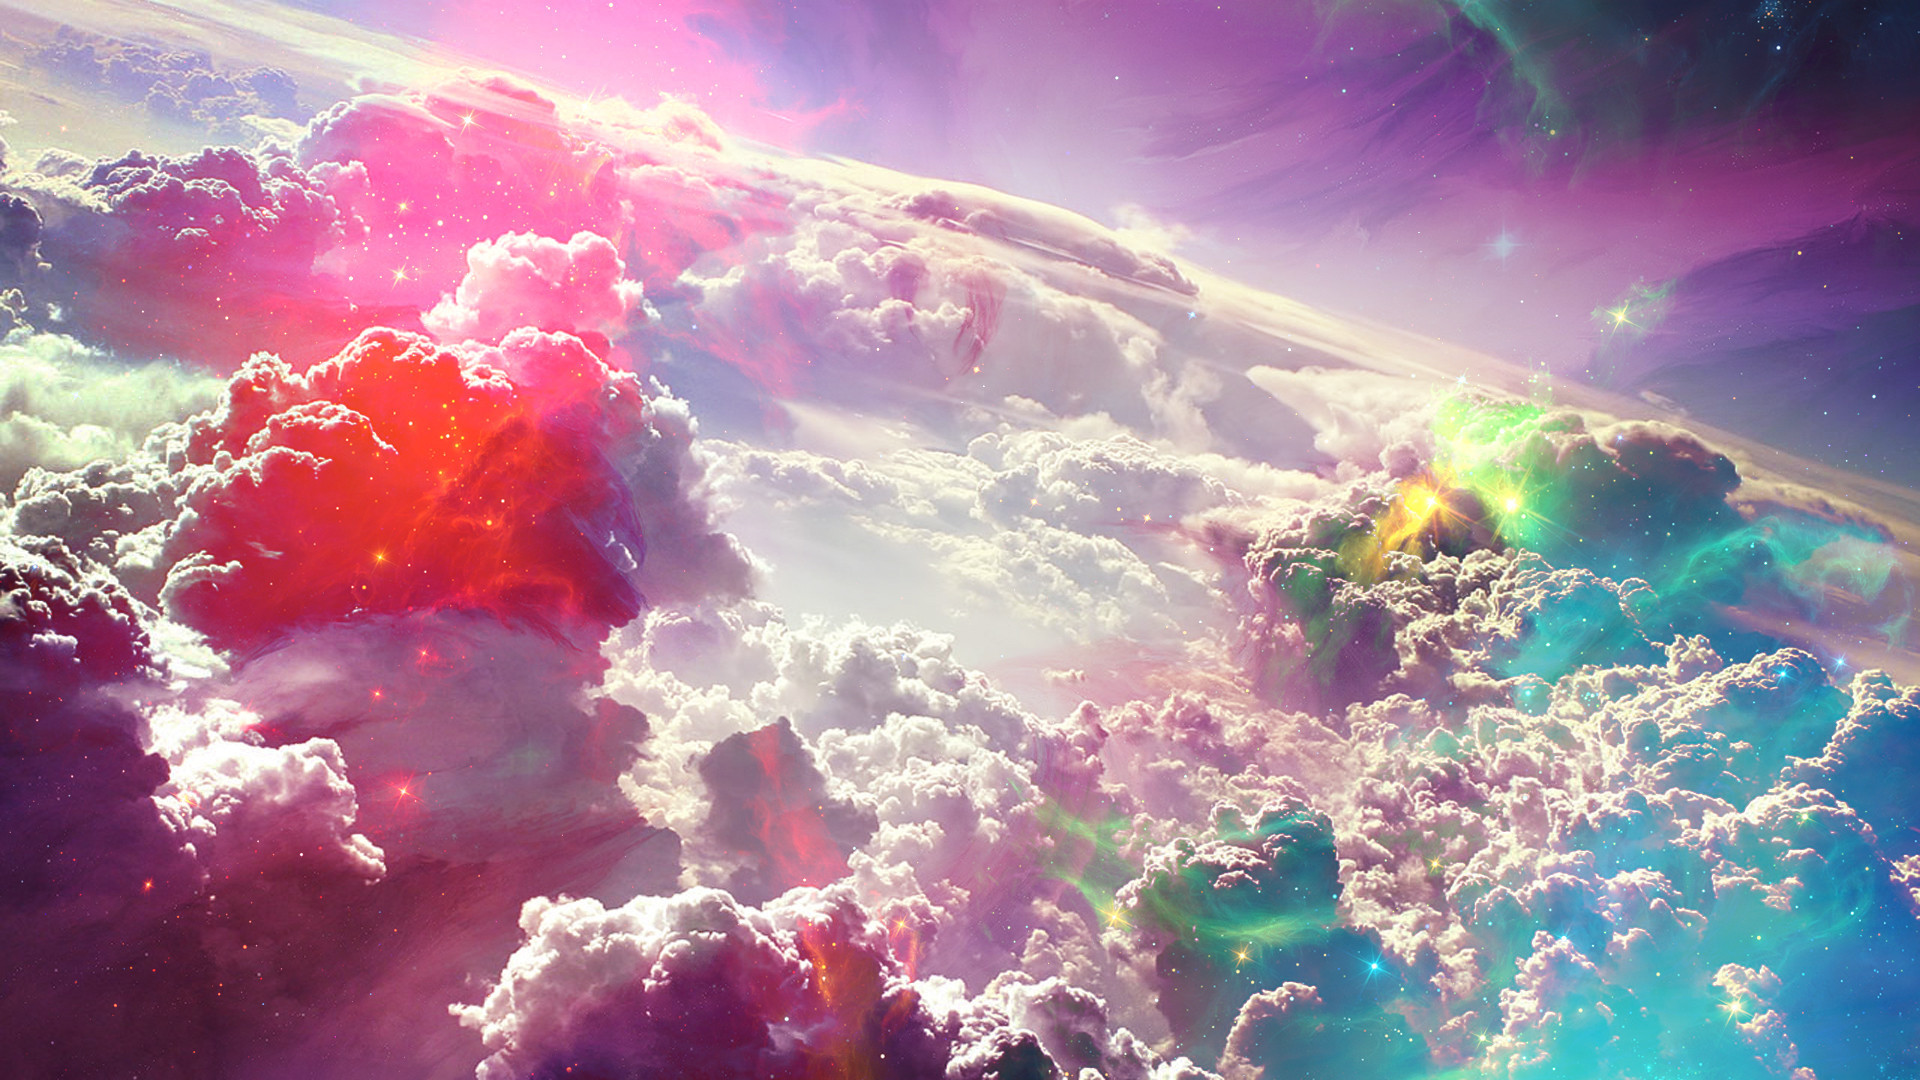 1920x1080 Colorful Fantasy Clouds Art HD Wallpaper - New HD Wallpapers